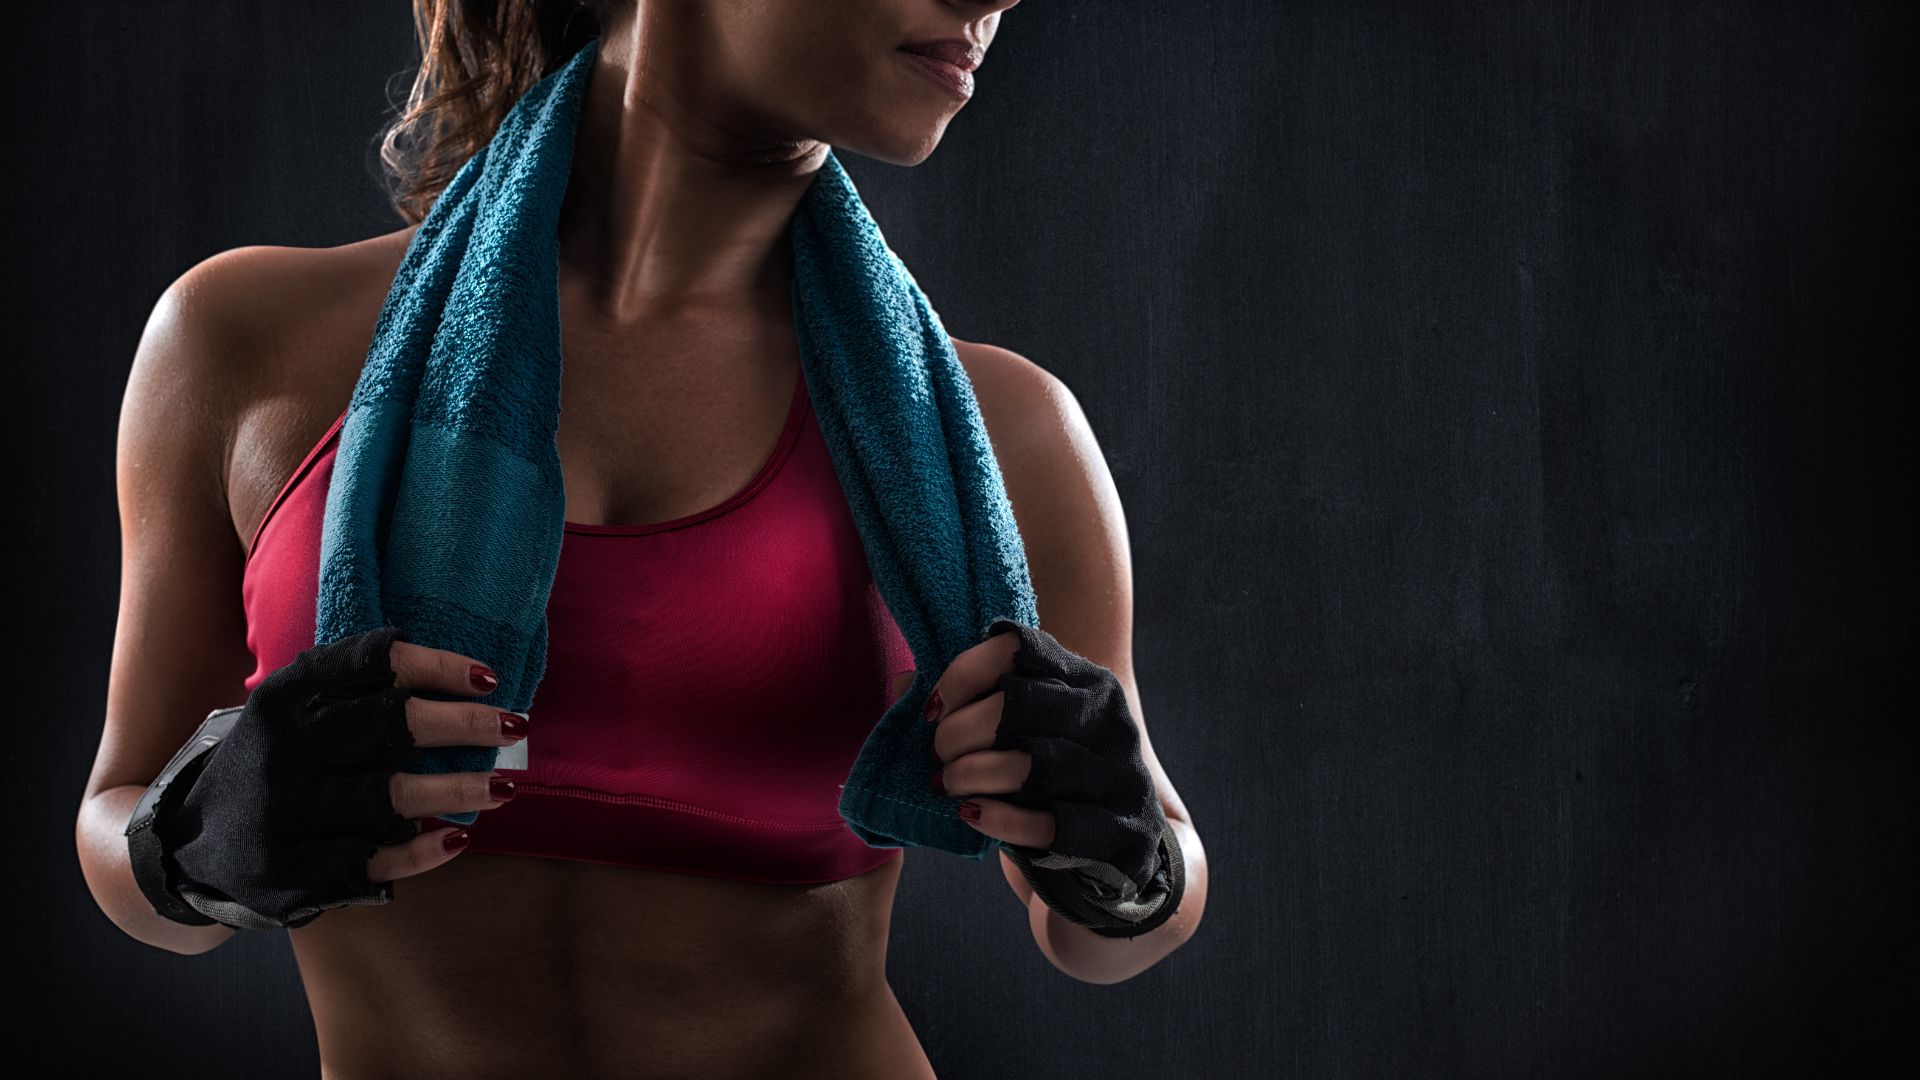 Get Ready to Sweat: Tips for Safety, Form & Results